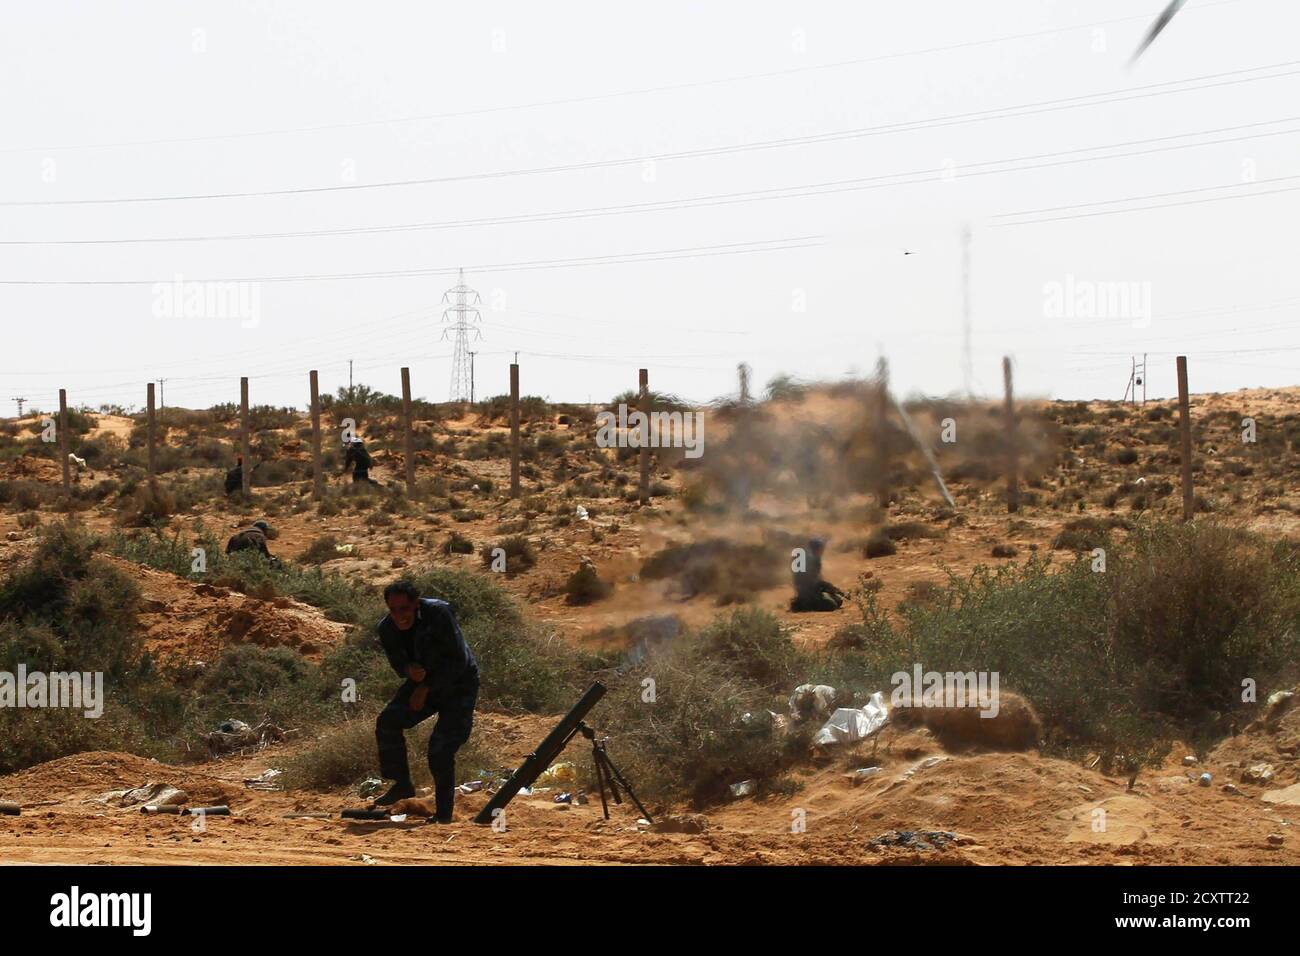 Rebels fire a mortar towards forces loyal to Muammar Gaddafi some 120 km (75 miles) east of Sirt in eastern Libya March 28, 2011. REUTERS/Finbarr O'Reilly (LIBYA - Tags: CONFLICT CIVIL UNREST POLITICS IMAGES OF THE DAY) Stock Photo